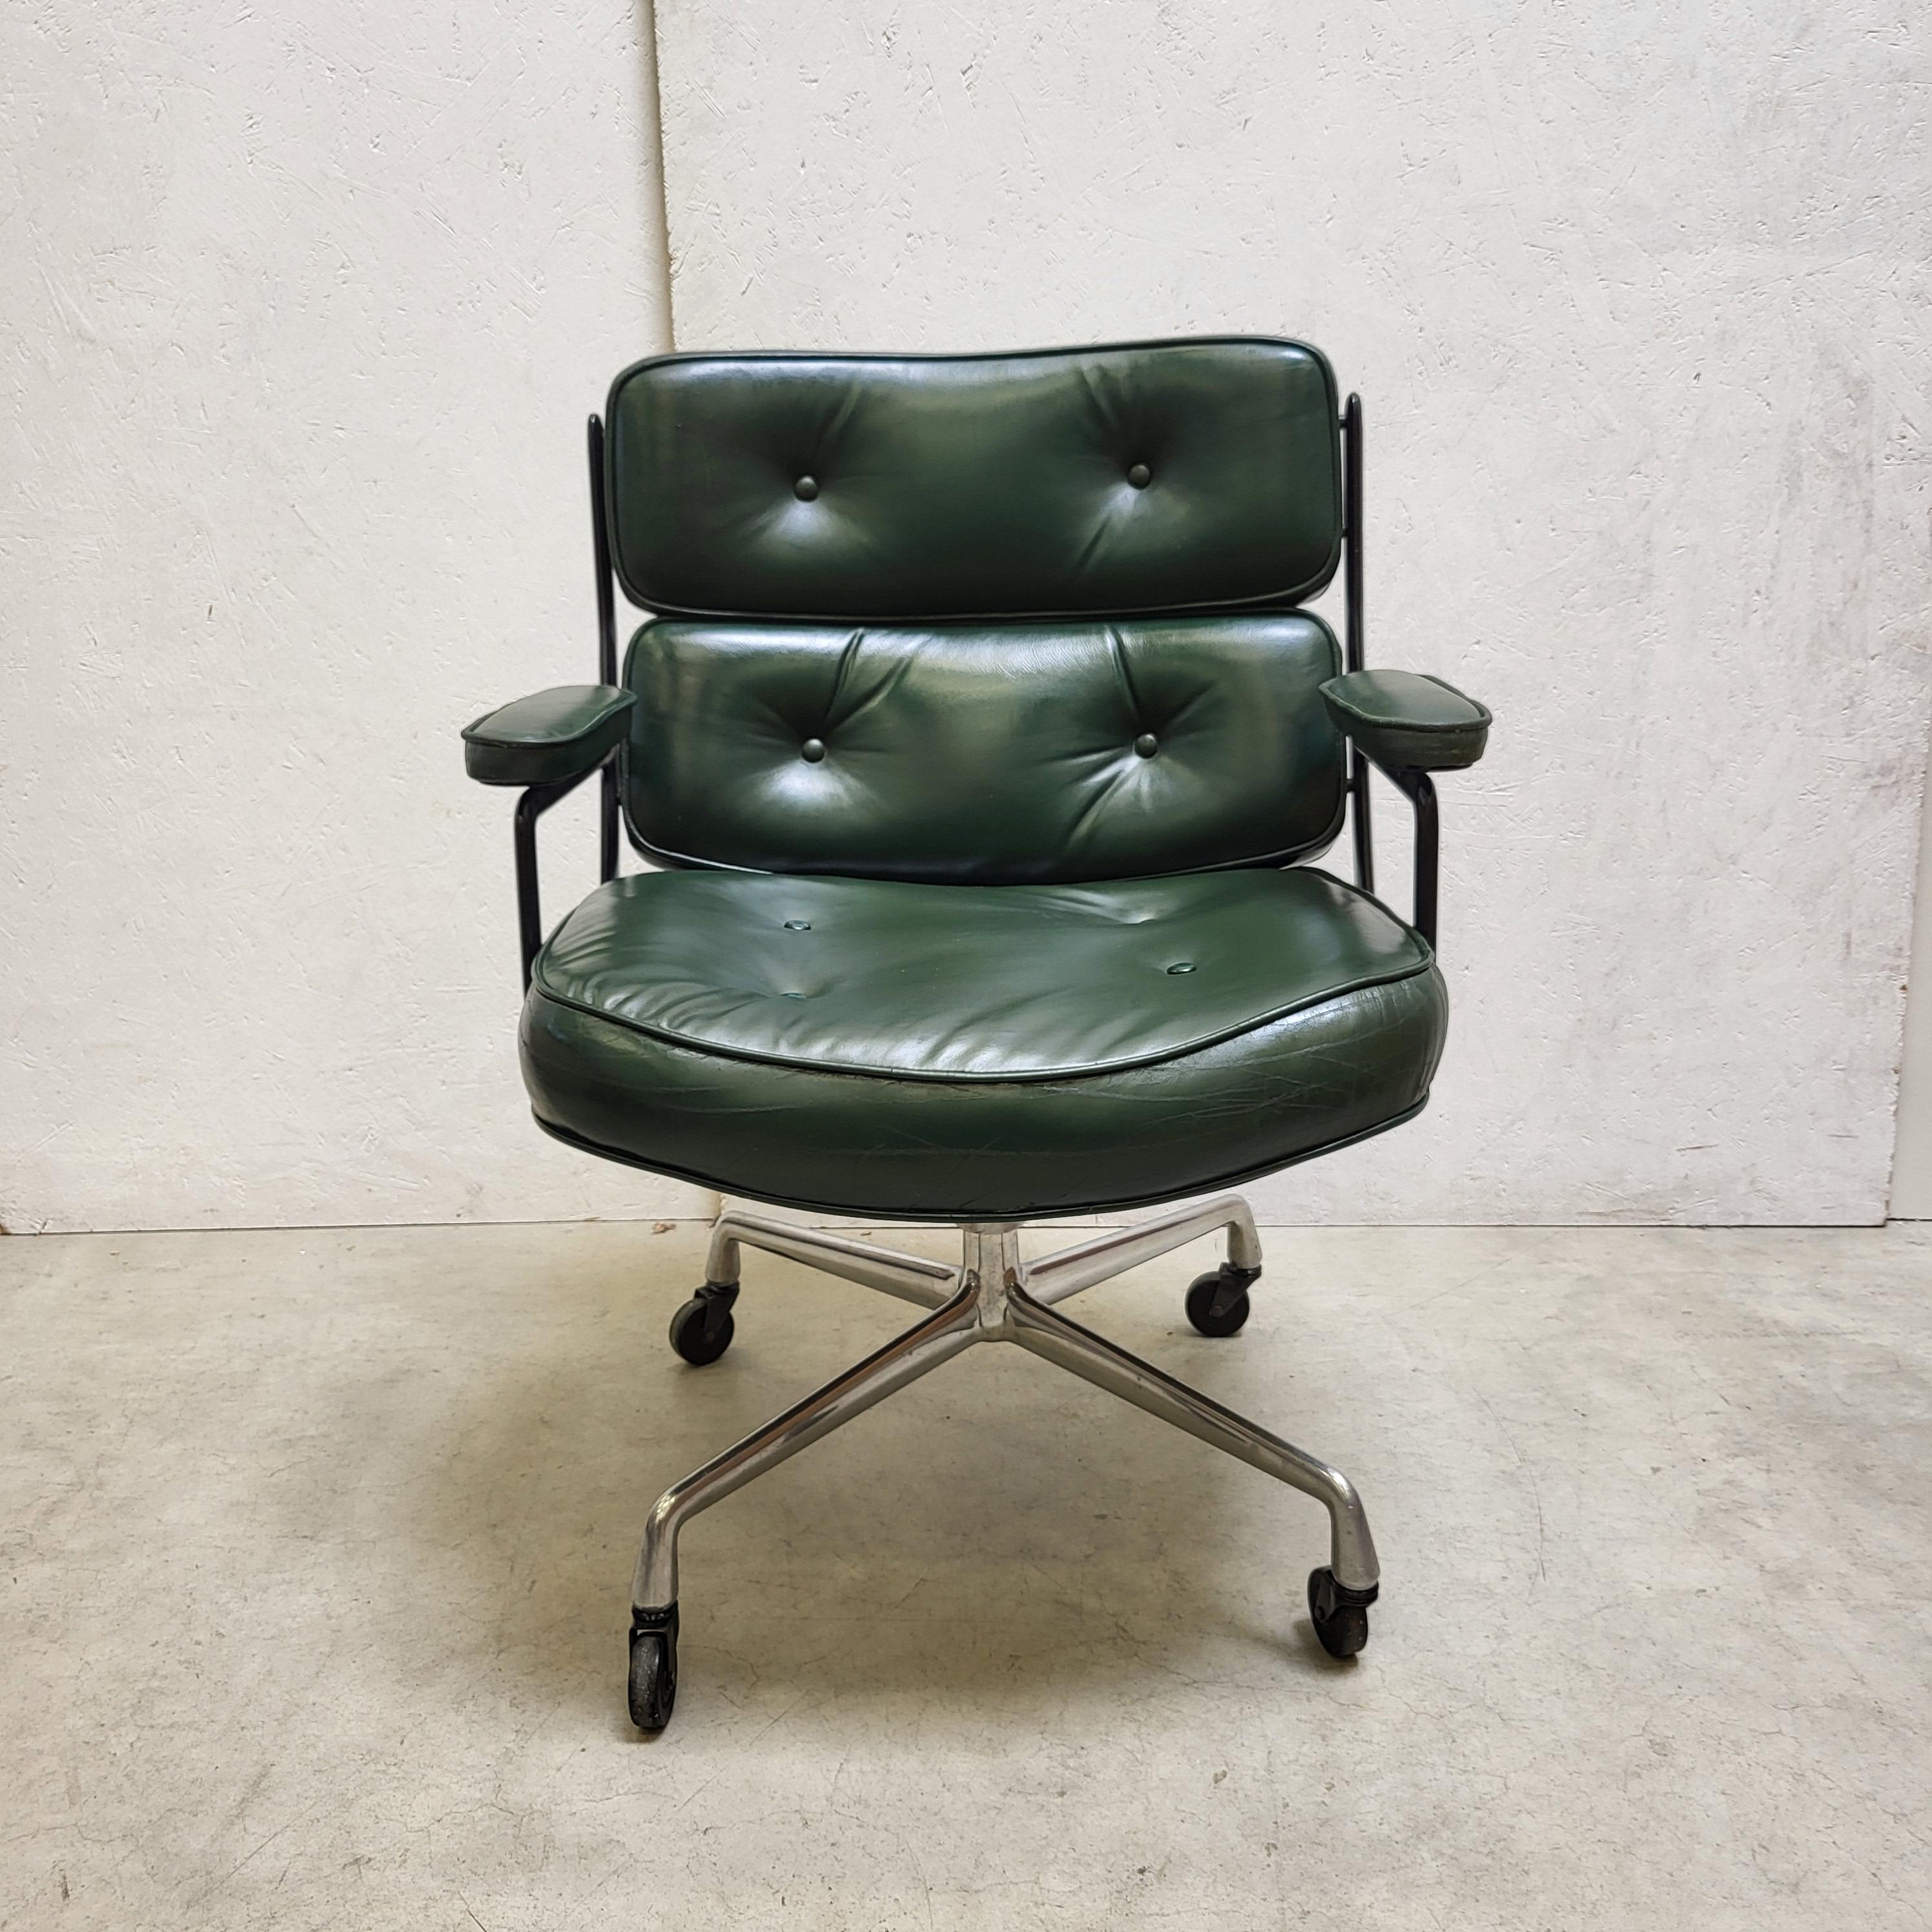 American Rare Green Herman Miller ES107 Lobby Office Chair by Charles Eames